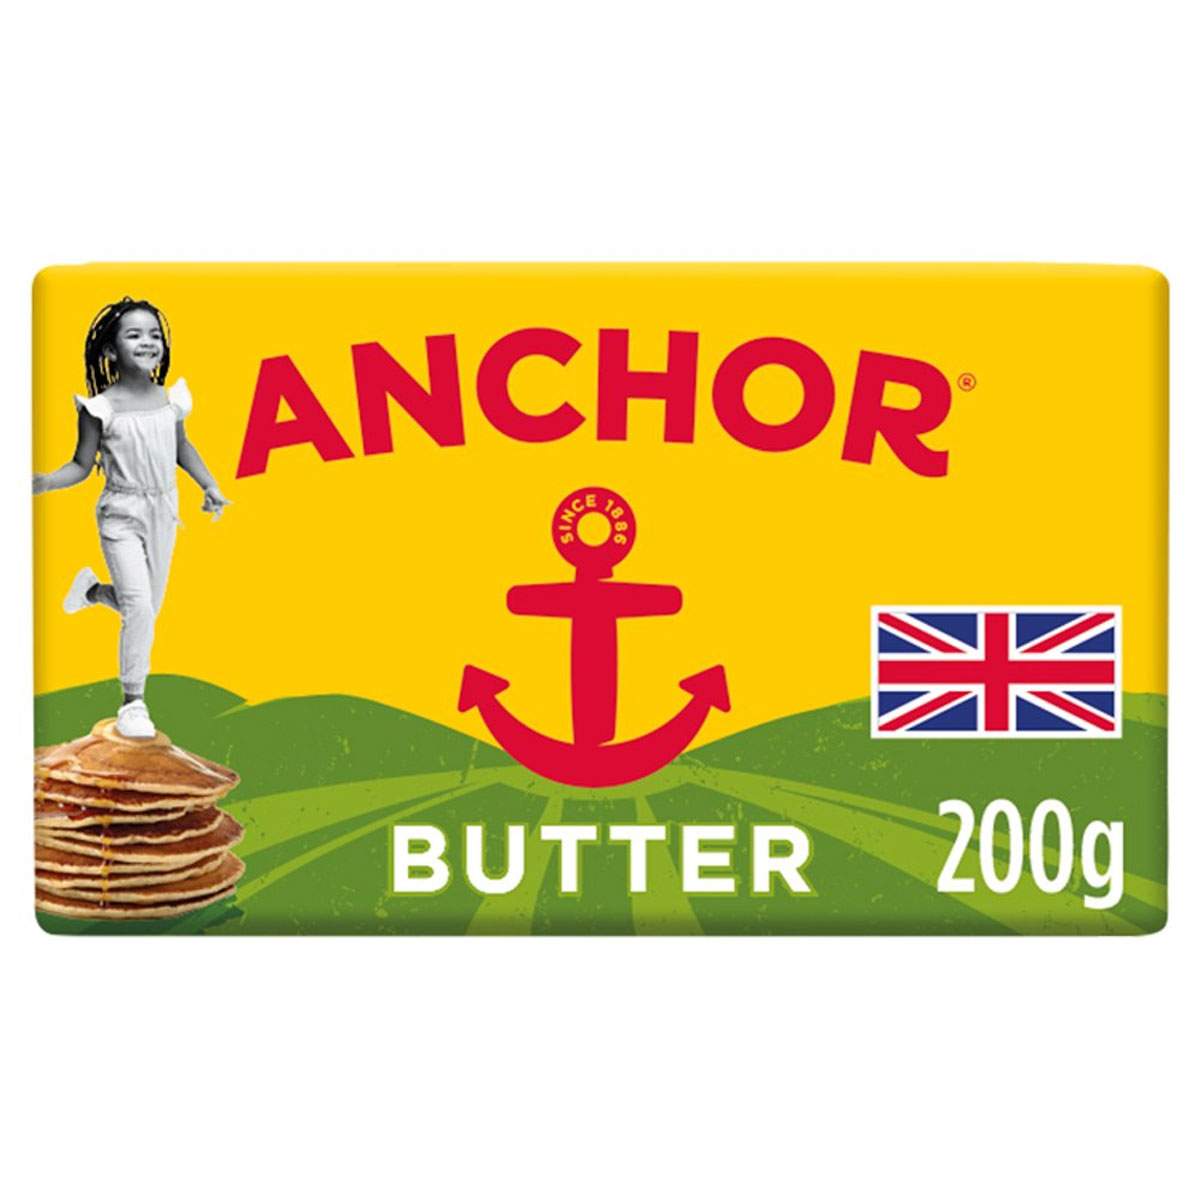 An Anchor - Salted Butter - 200g bar with an image of a girl and a British flag.